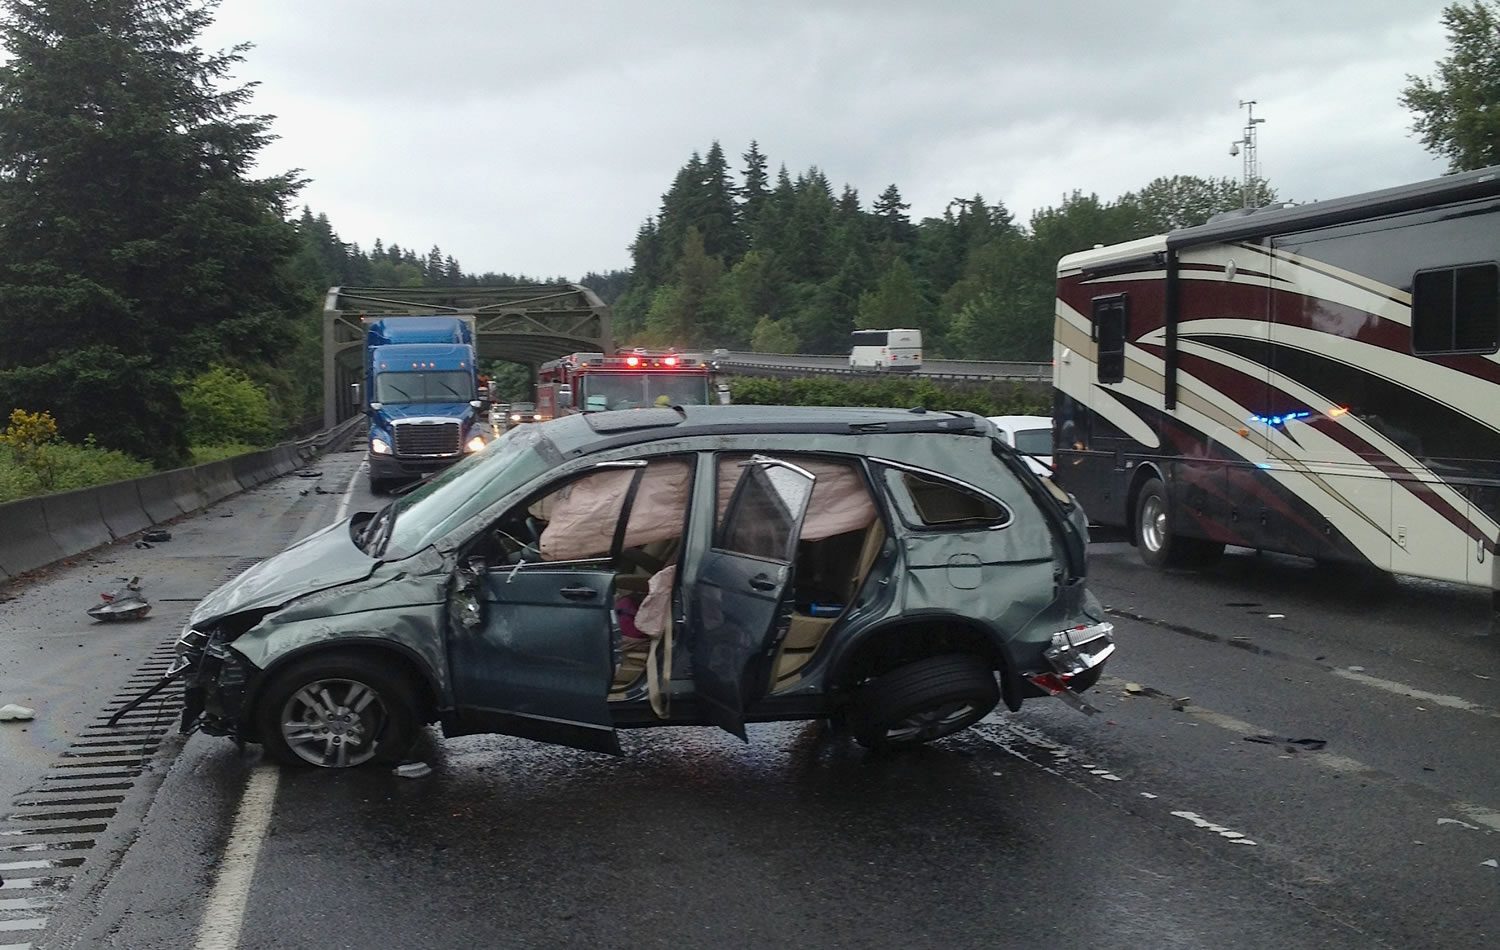 An SUV overturned in rainy conditions early Tuesday afternoon on Interstate 5 north of the East Fork Lewis River Bridge.